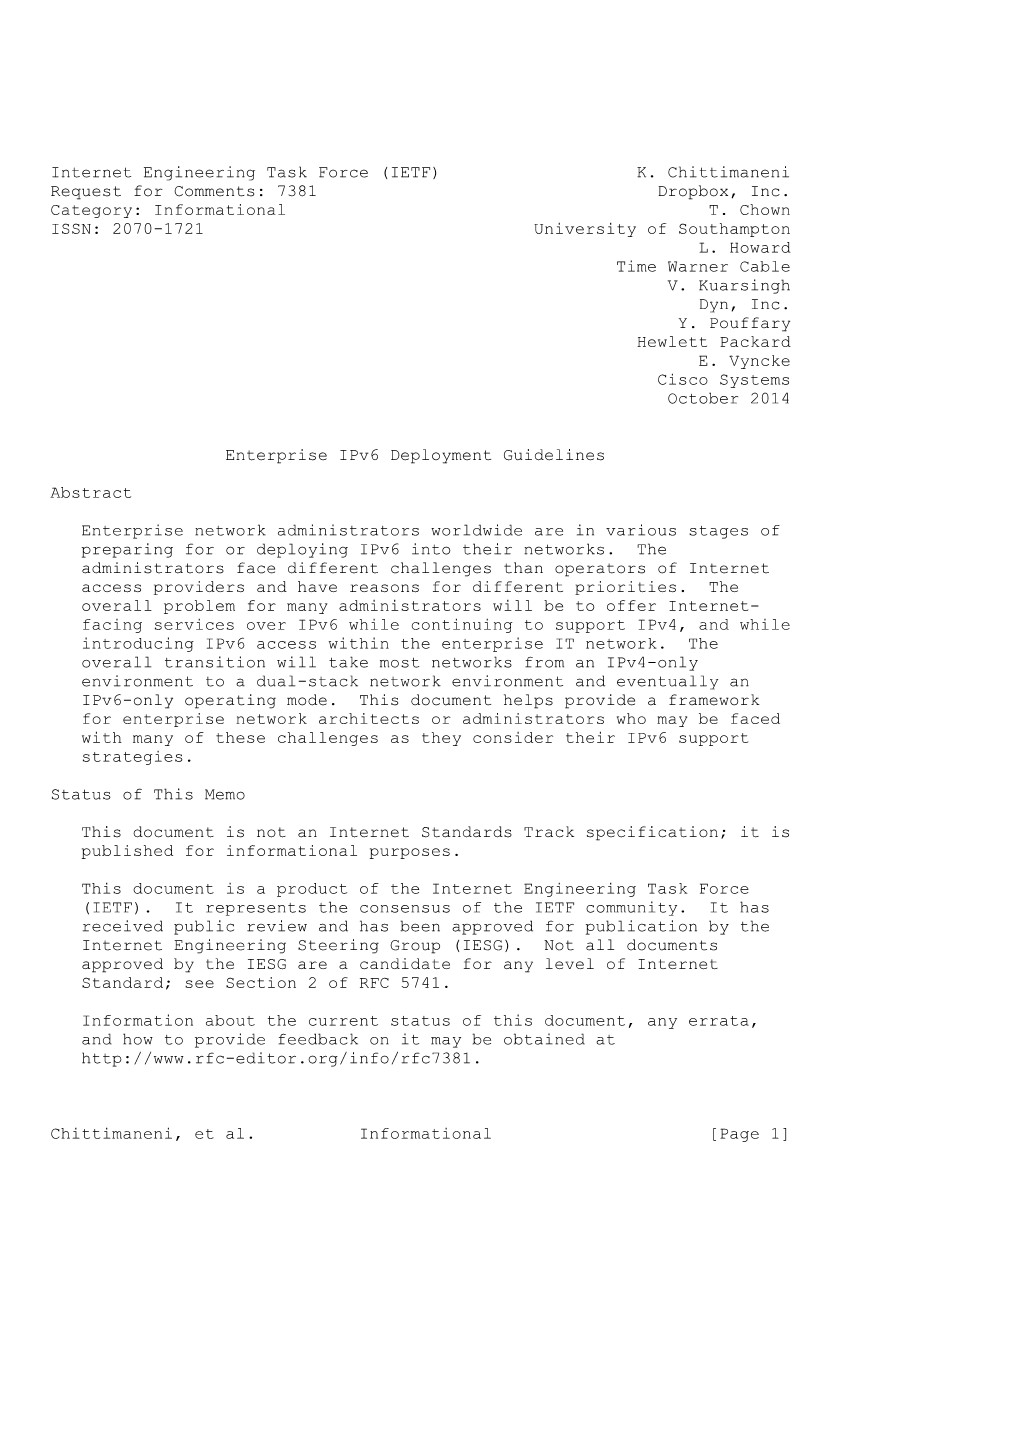 Internet Engineering Task Force (IETF) K. Chittimaneni Request for Comments: 7381 Dropbox, Inc